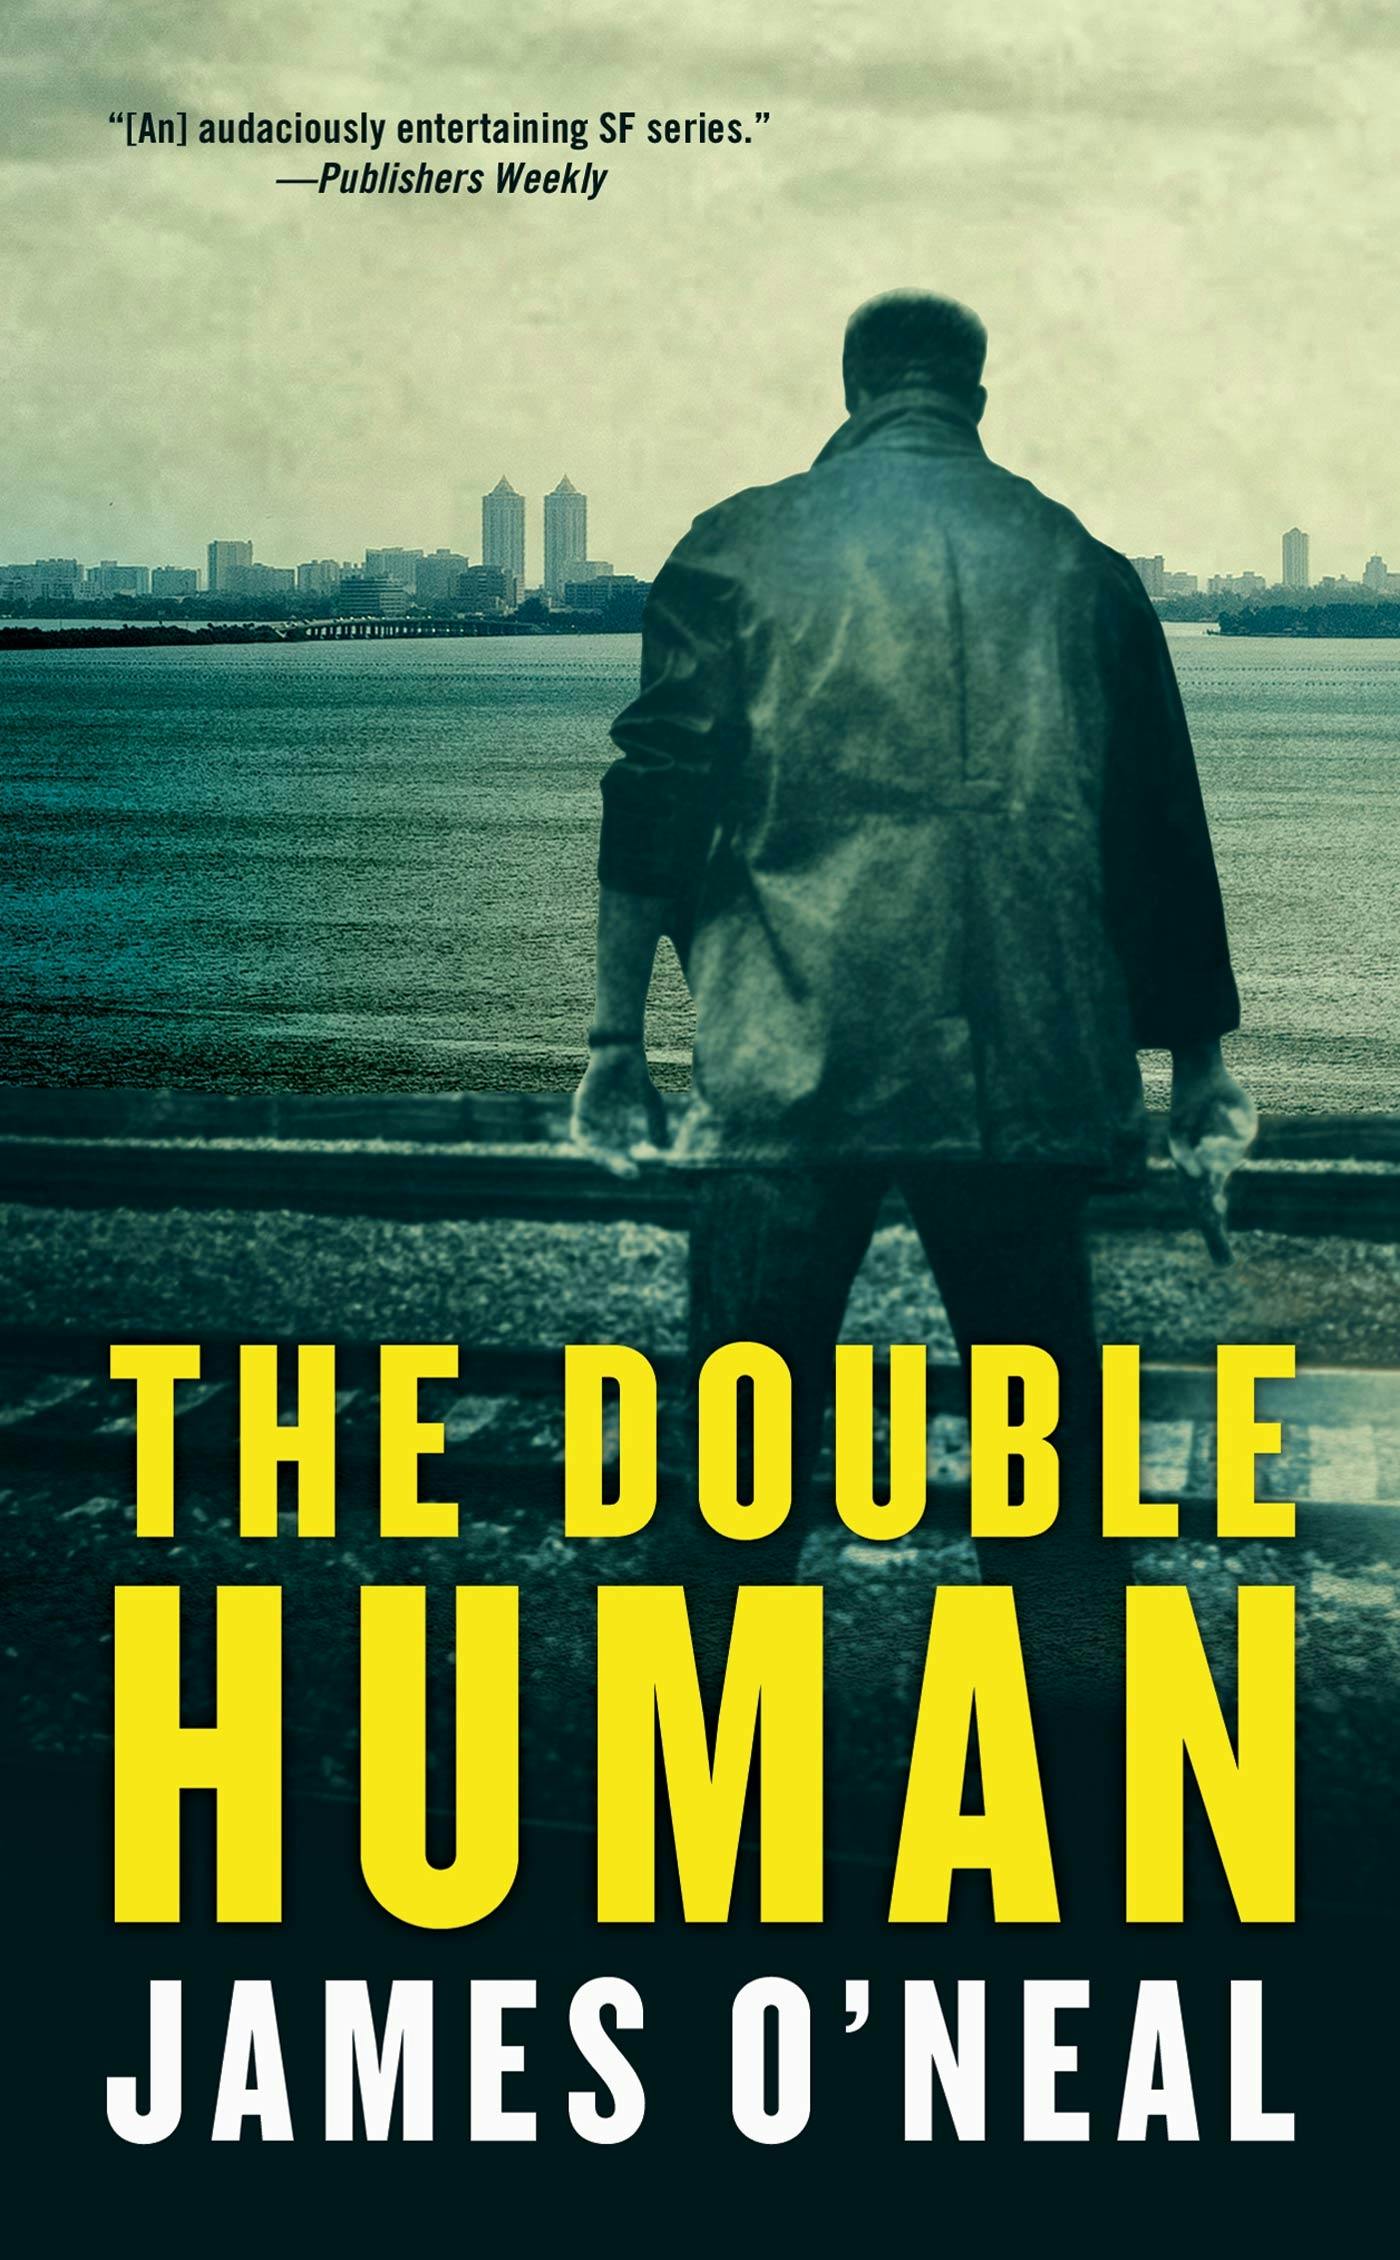 Image of The Double Human